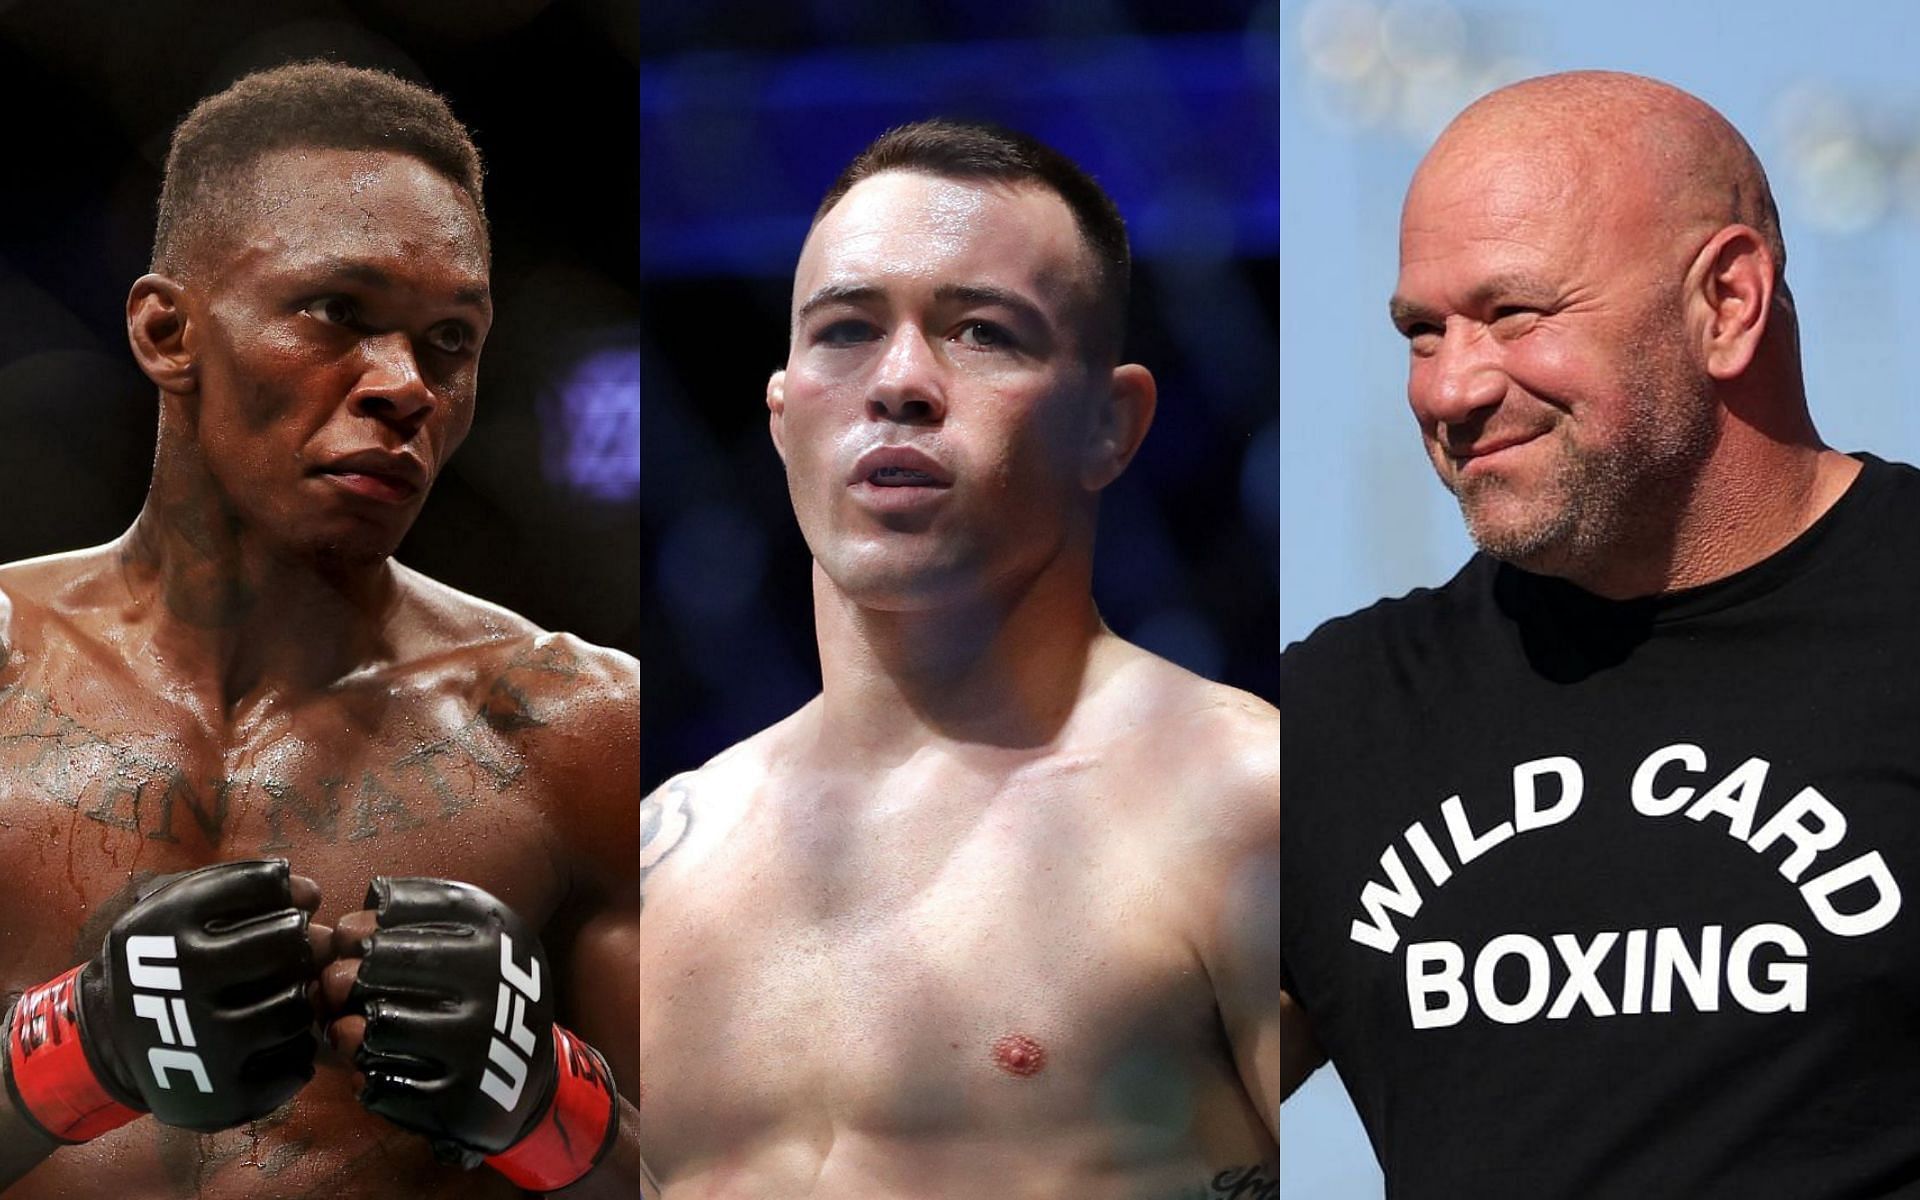 Dana White gives his thoughts on the idea of Israel Adesanya vs Colby Covington